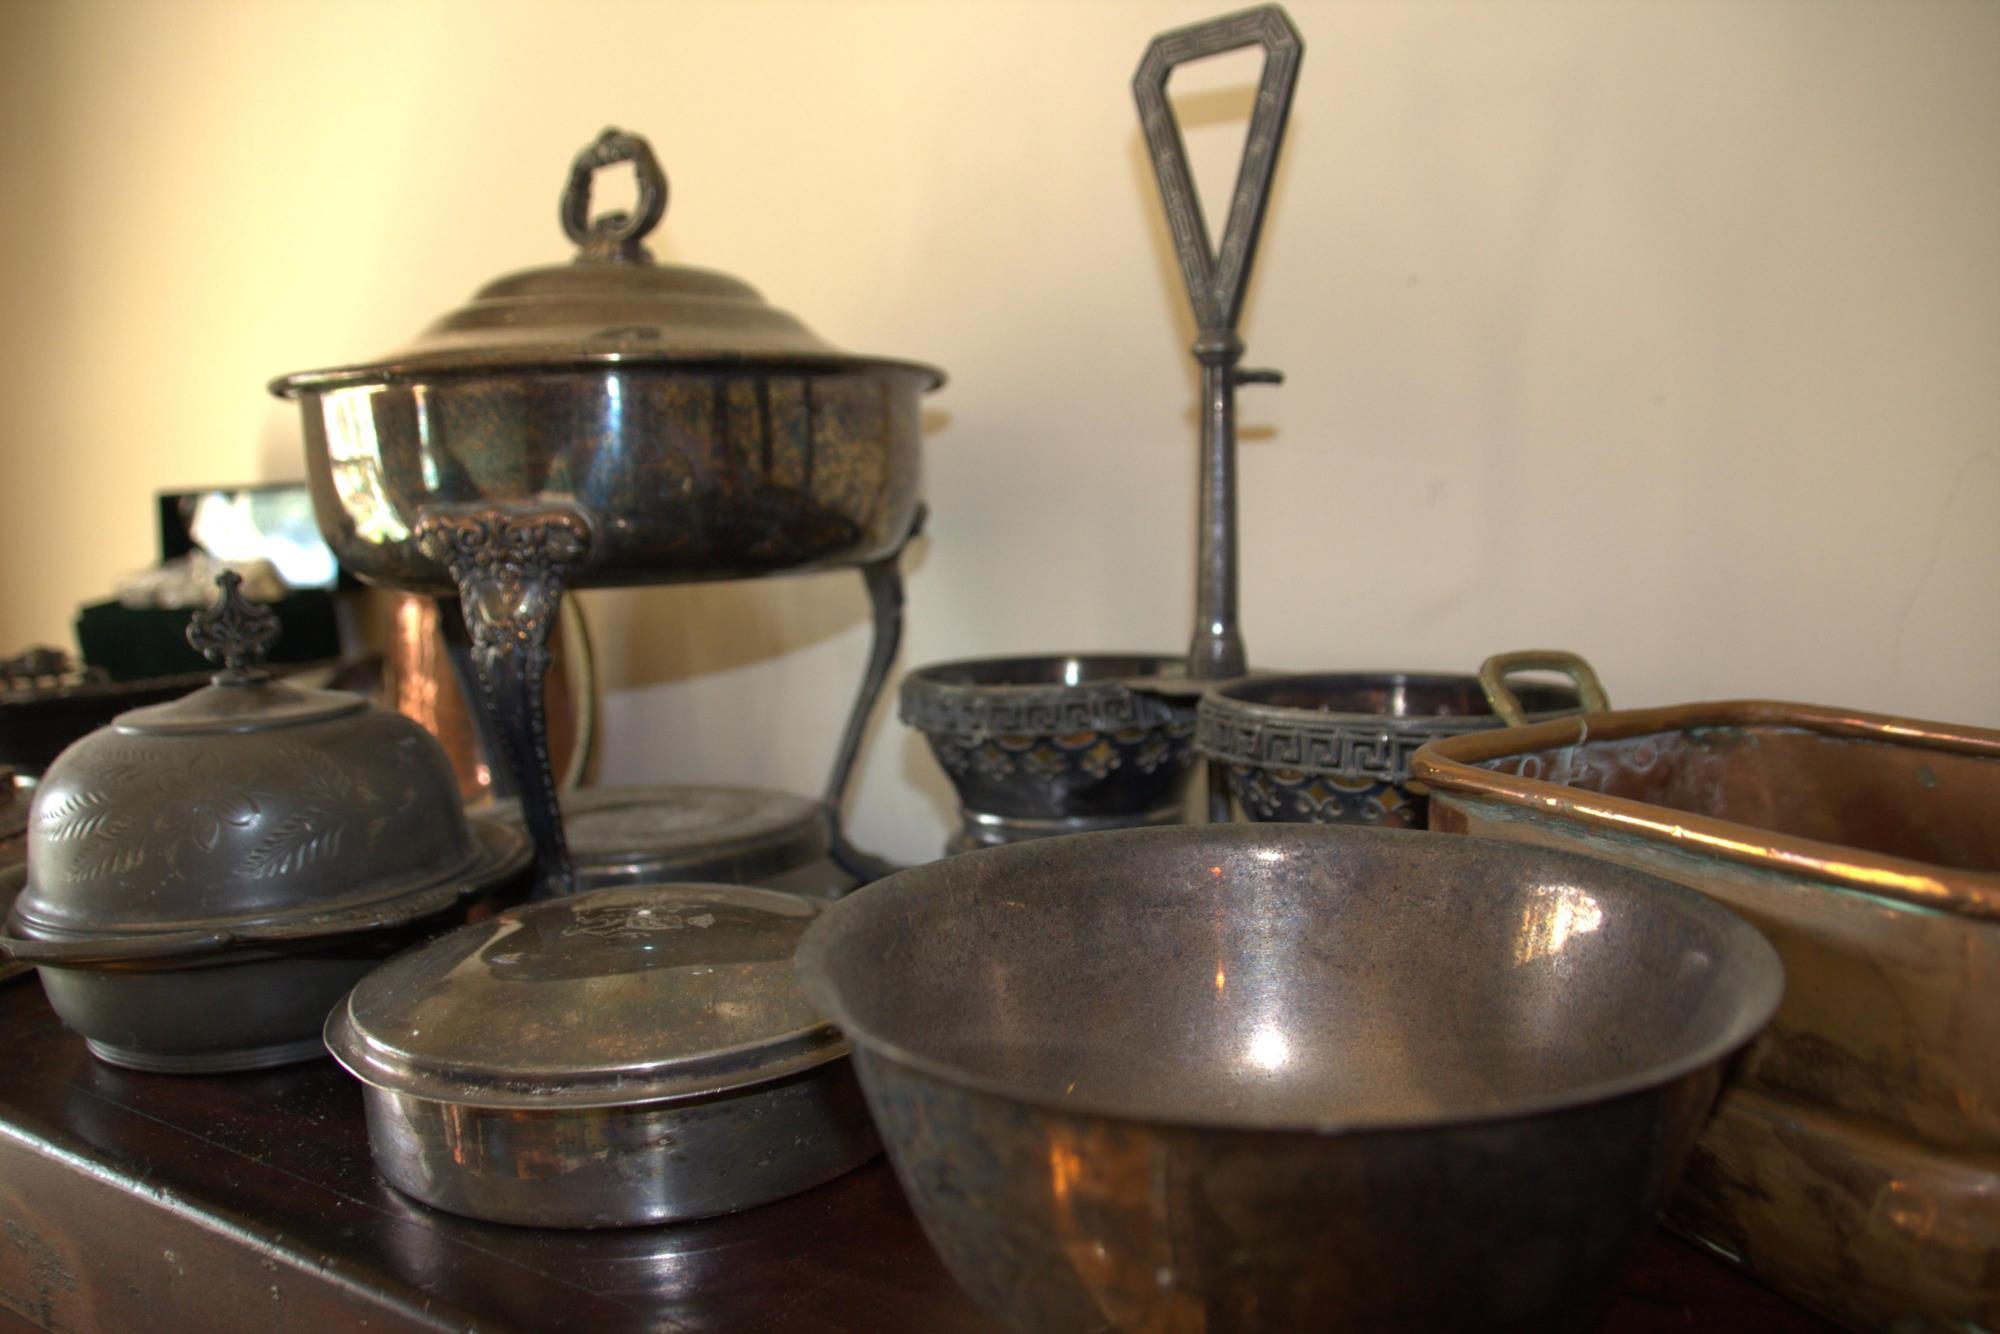 16 + PIECES OF SILVER PLATE & OTHER TABLETOP ITEMS